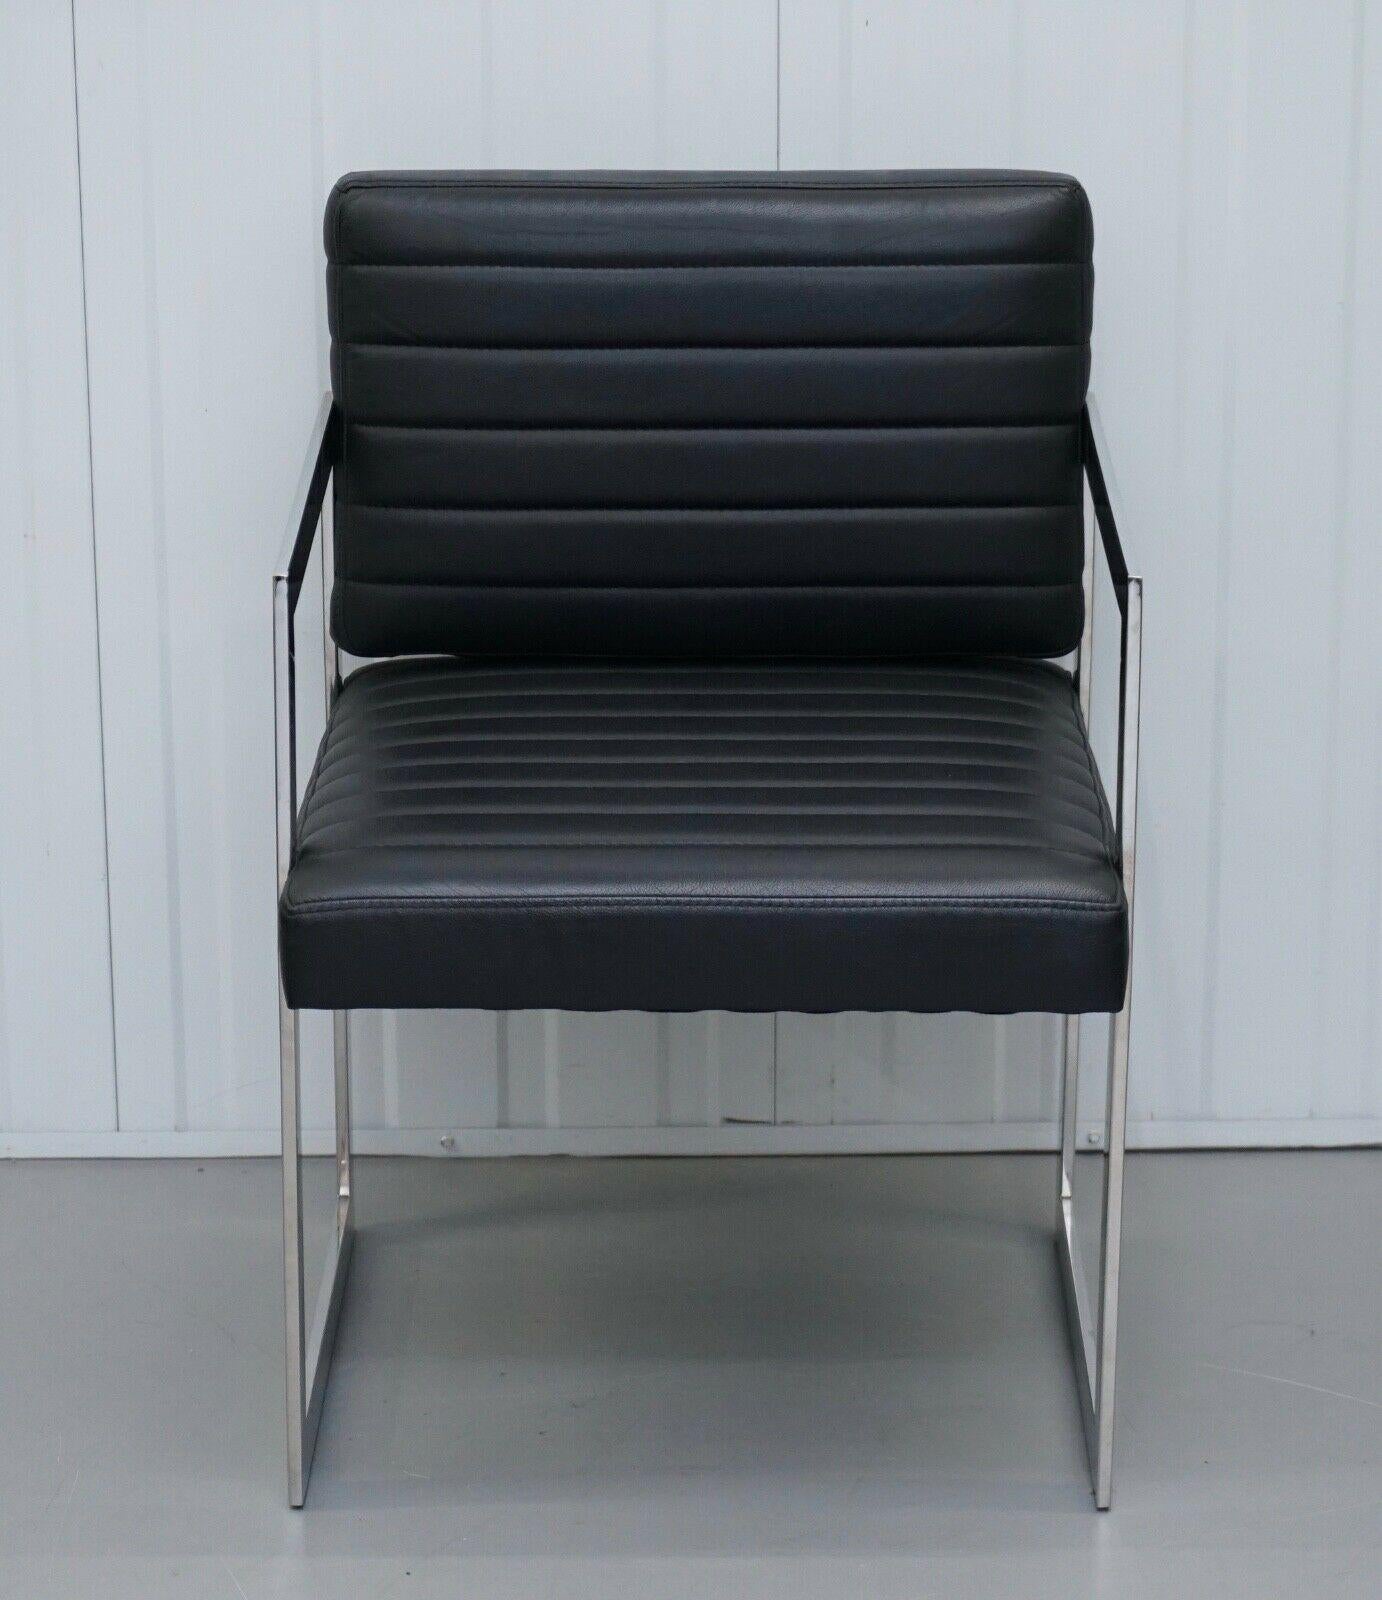 Hand-Crafted 1 of 2 Eichholtz Black Leather & Chrome Office Desk Chairs